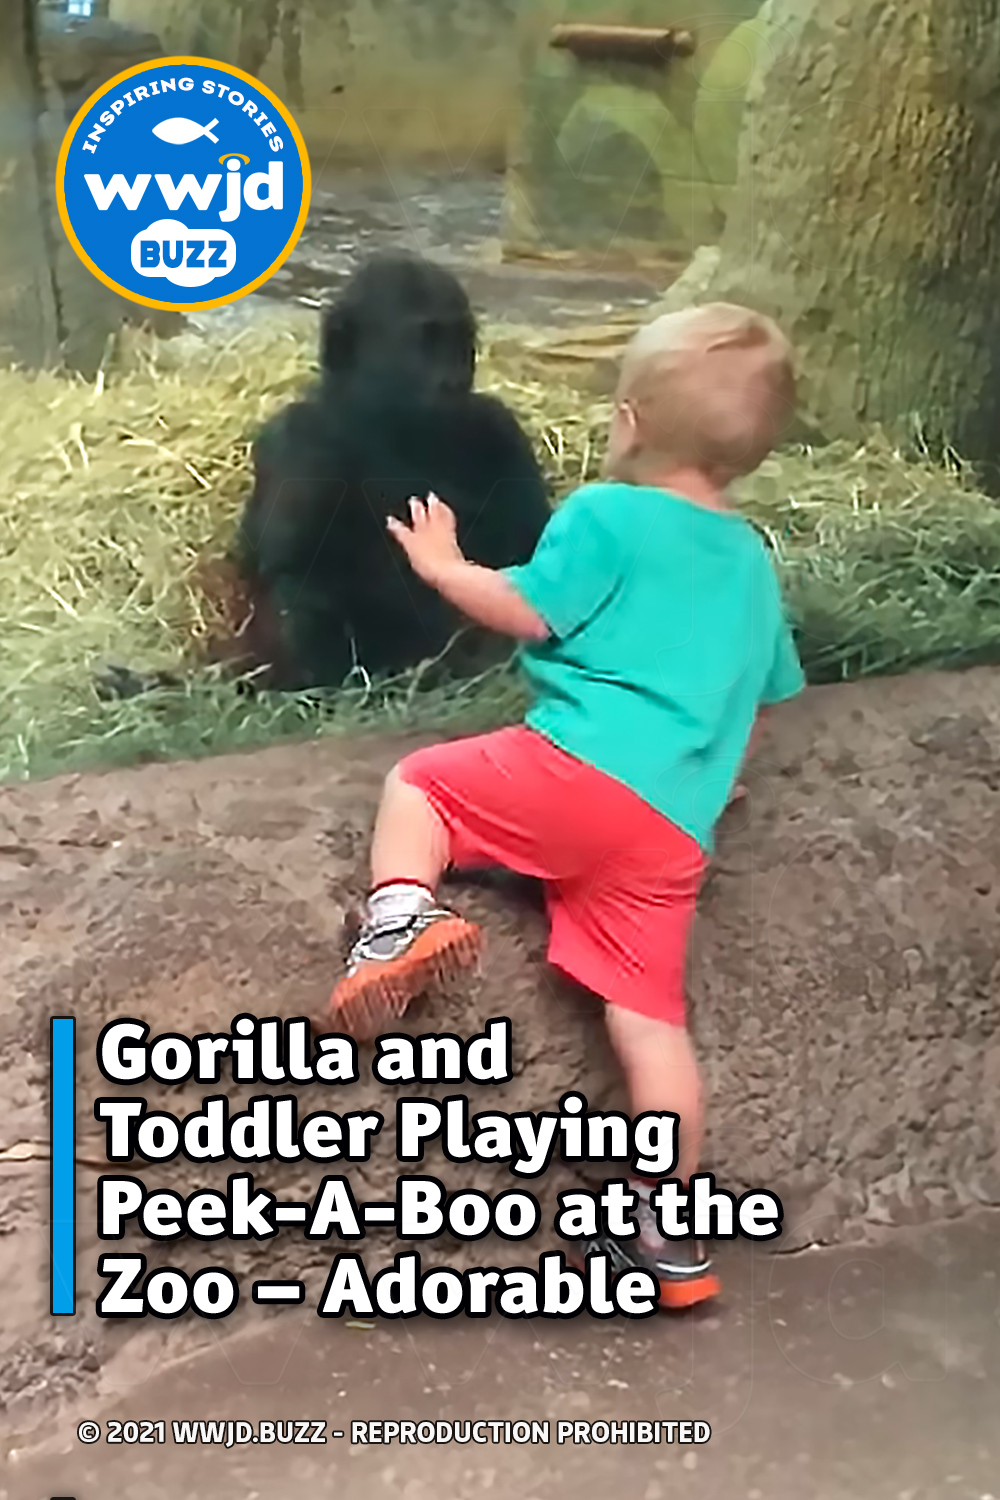 Gorilla and Toddler Playing Peek-A-Boo at the Zoo – Adorable